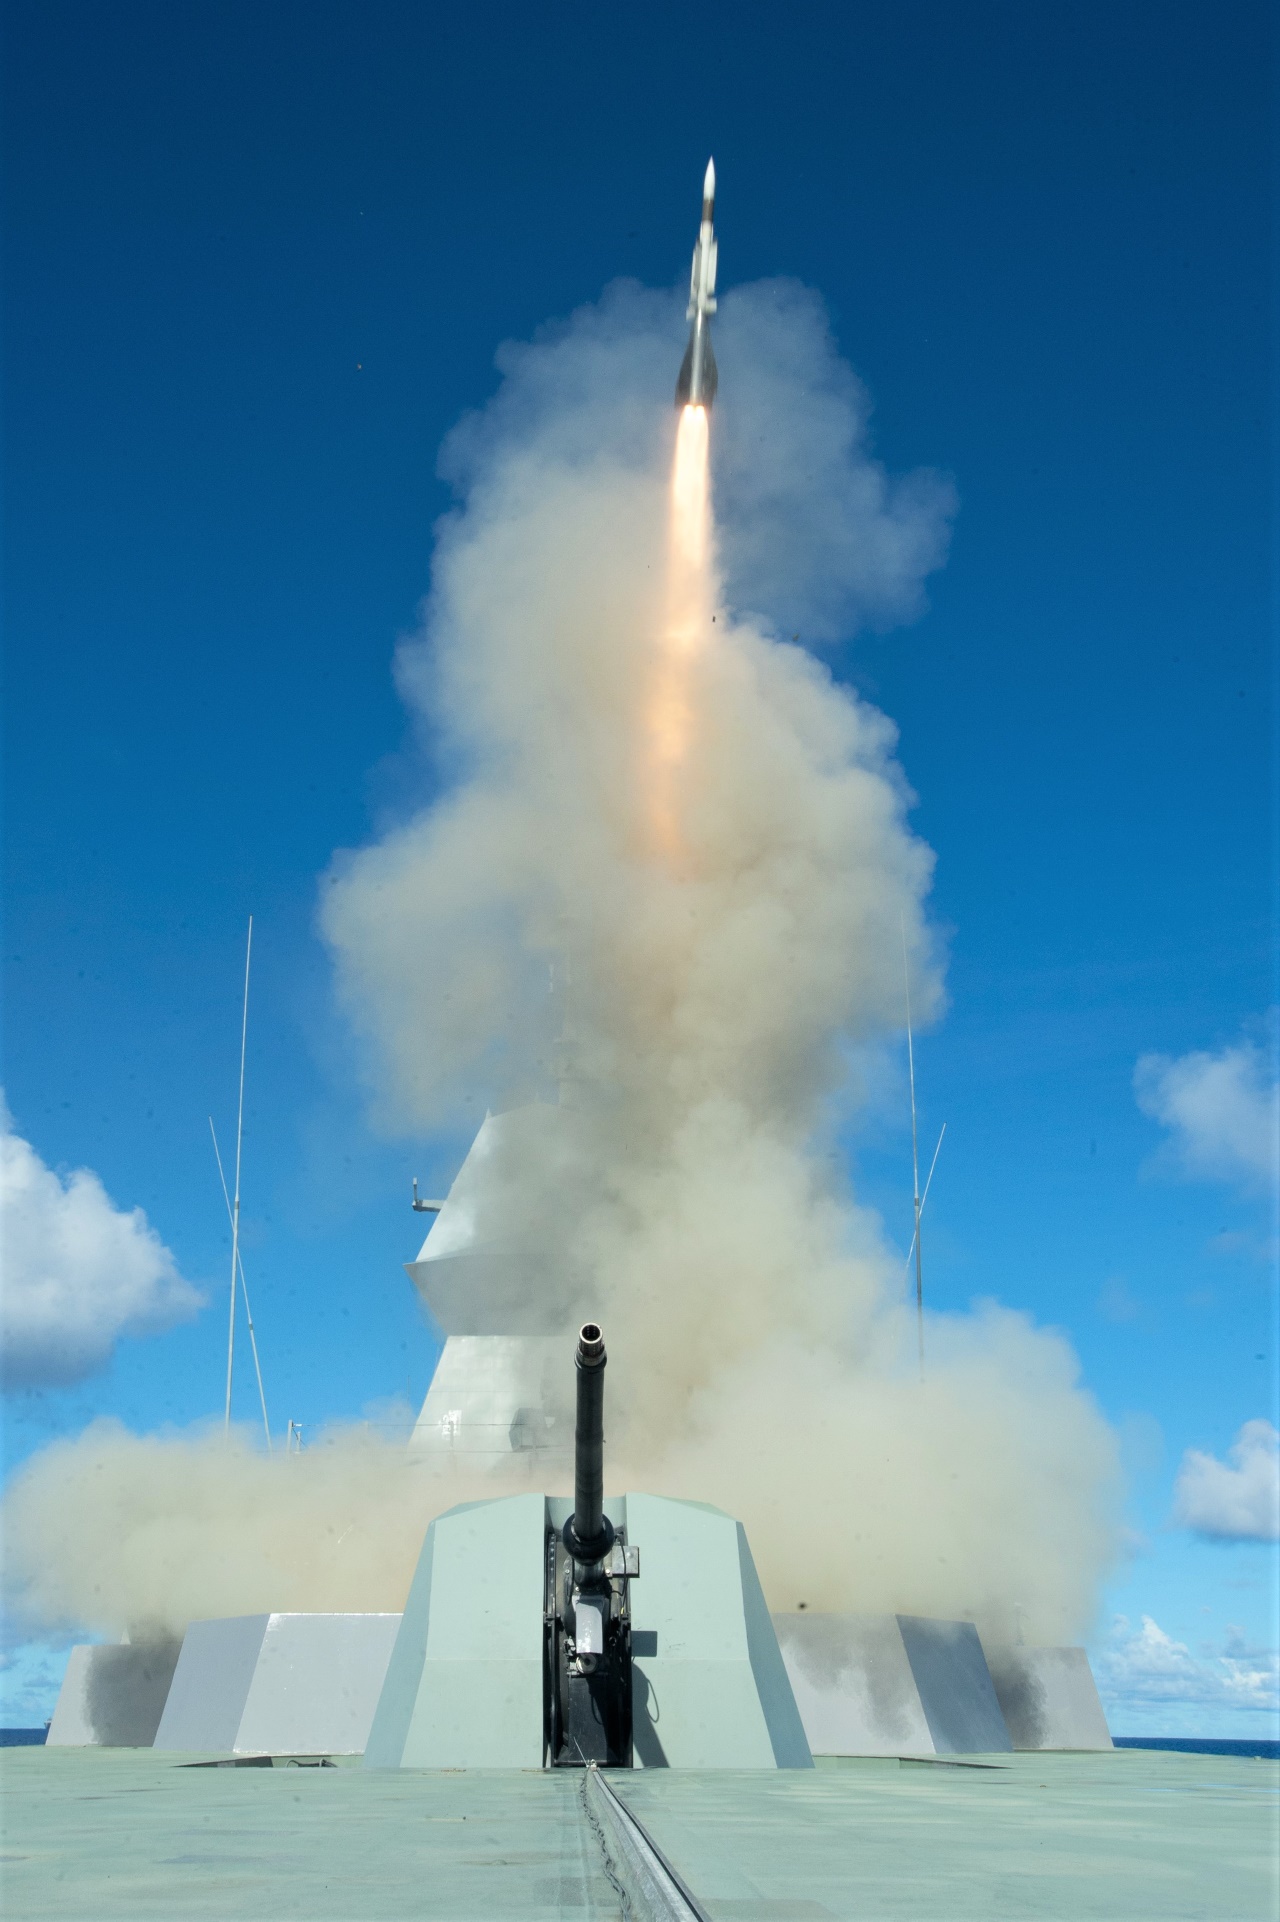 RSN frigate RSS Formidable firing an Aster surface-to-air missile in the waters off Guam during Ex Pacific Griffin 2019.